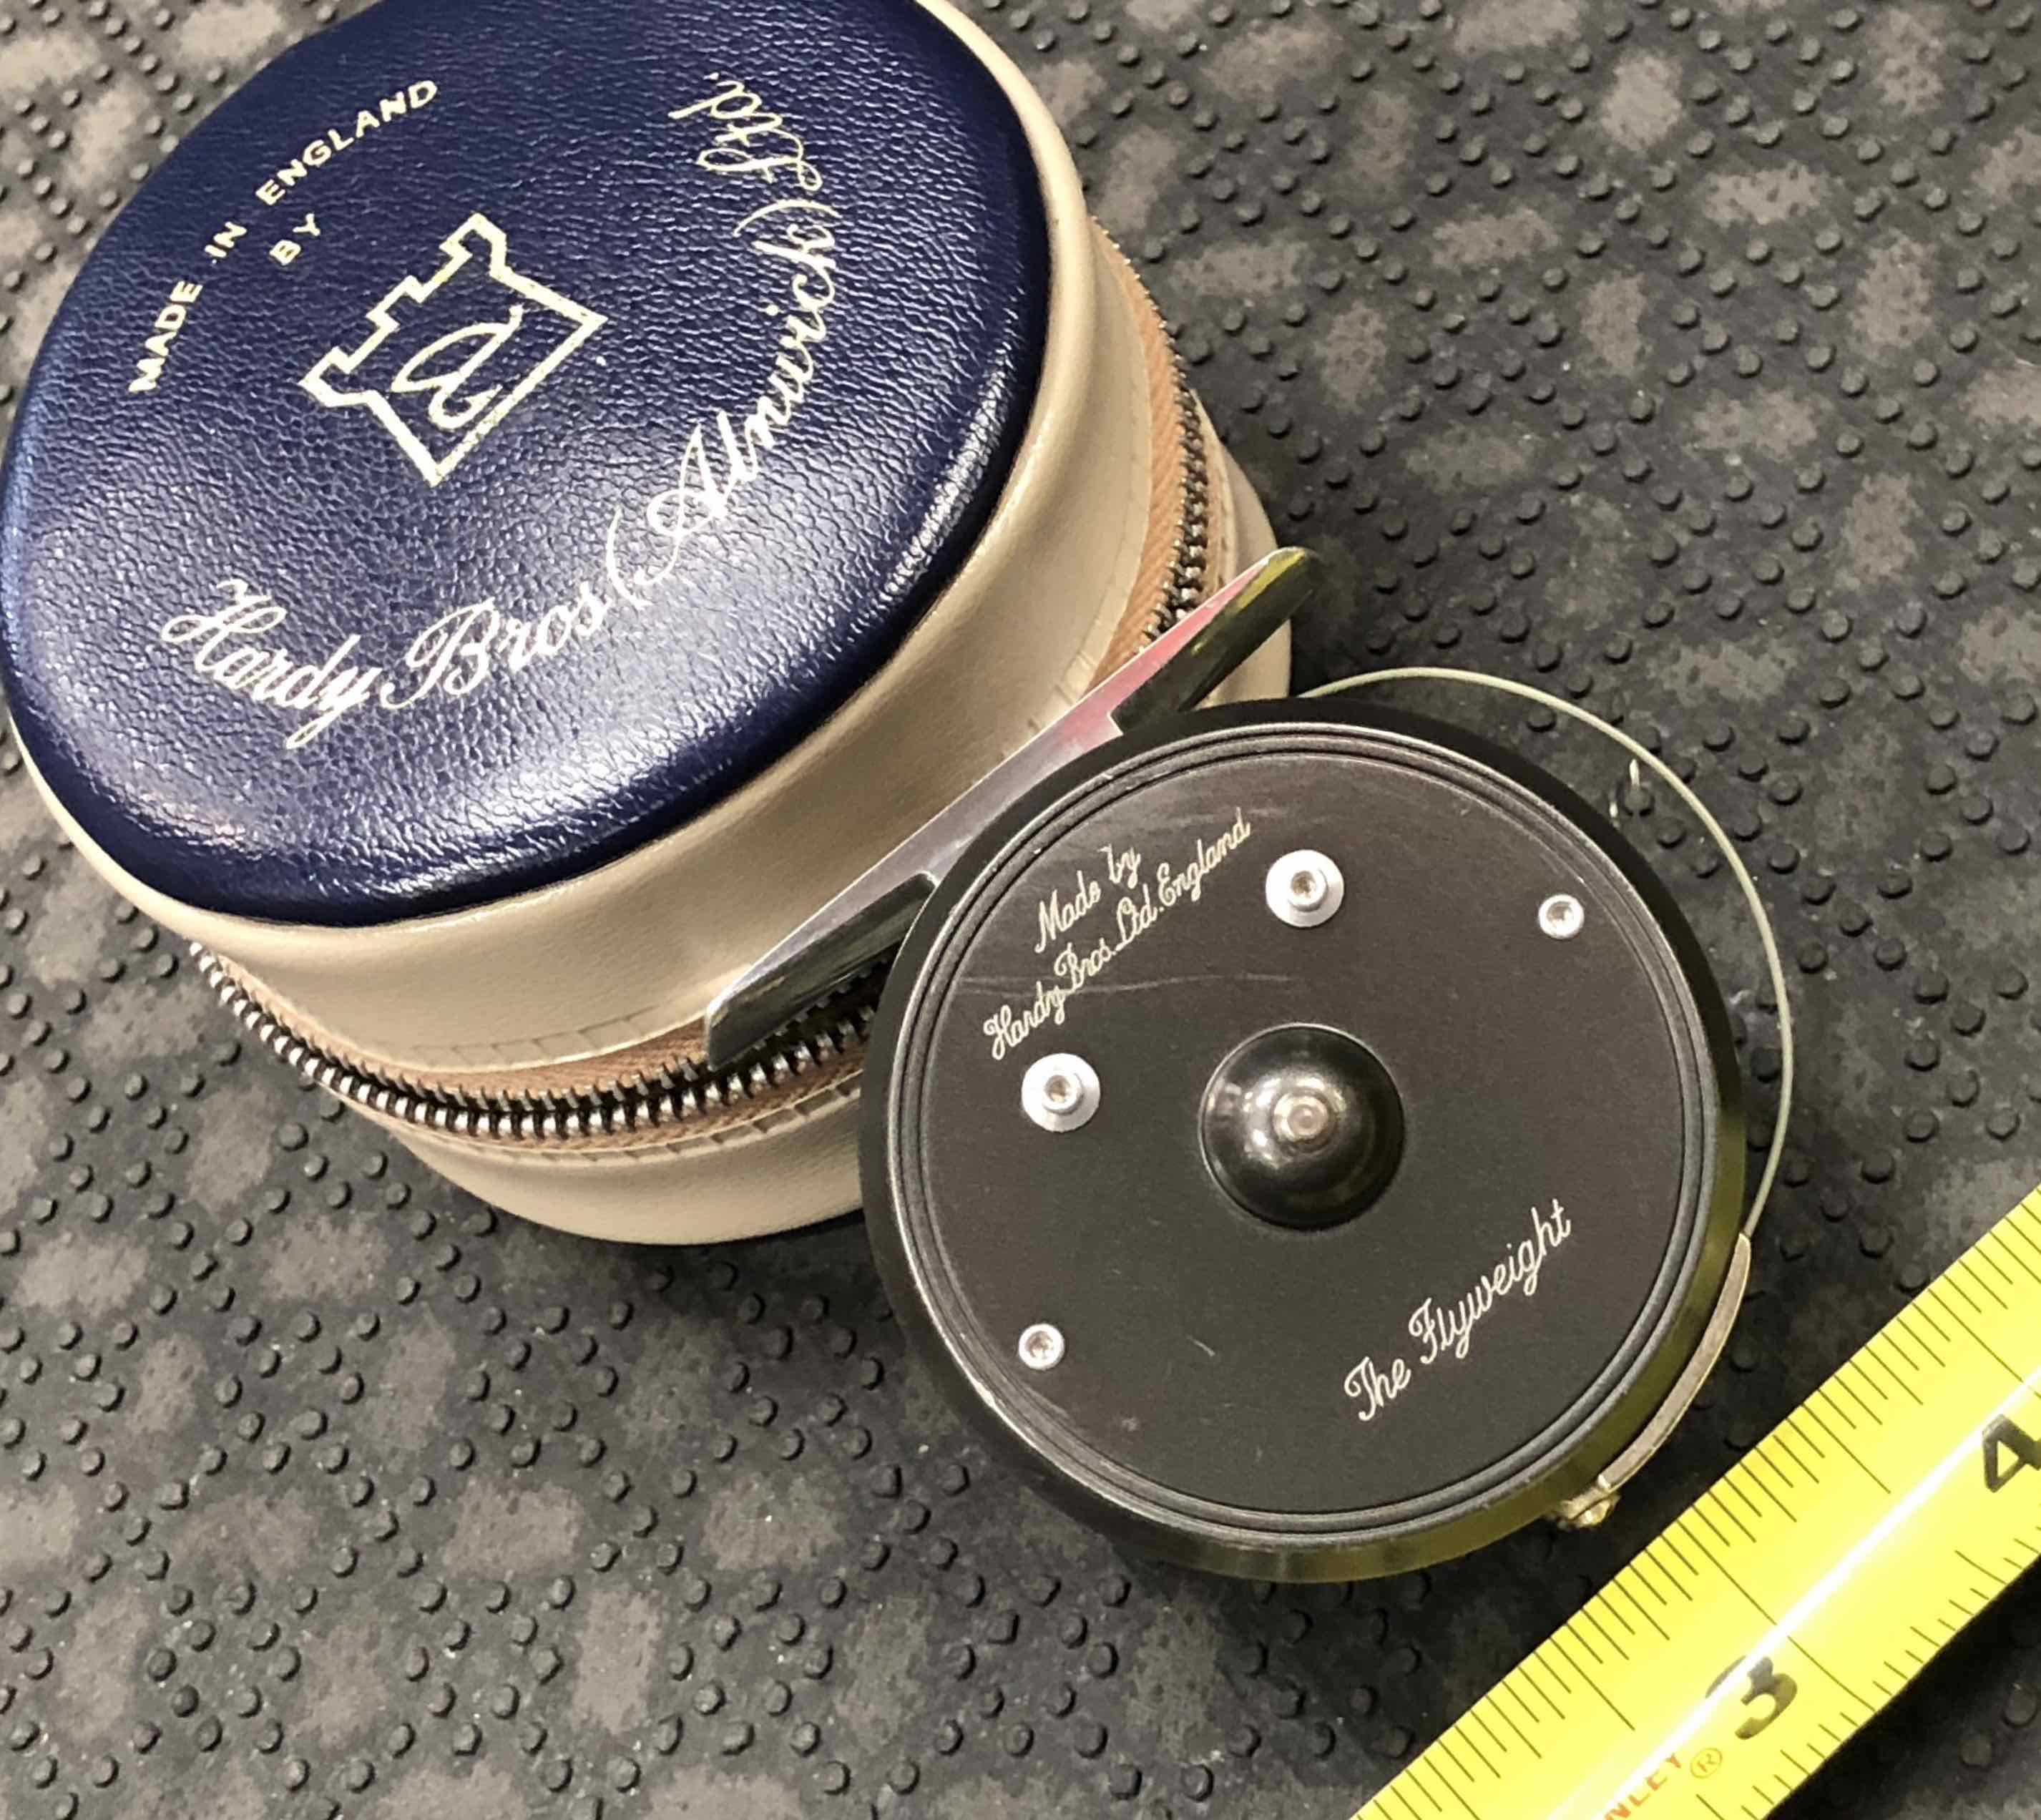 Hardy Fly Reel - Made in England - Classic Lightweight Series - "The Flyweight” c/w Zippered Vinyl Case & DT2F - EXCELLENT CONDITION! - $175